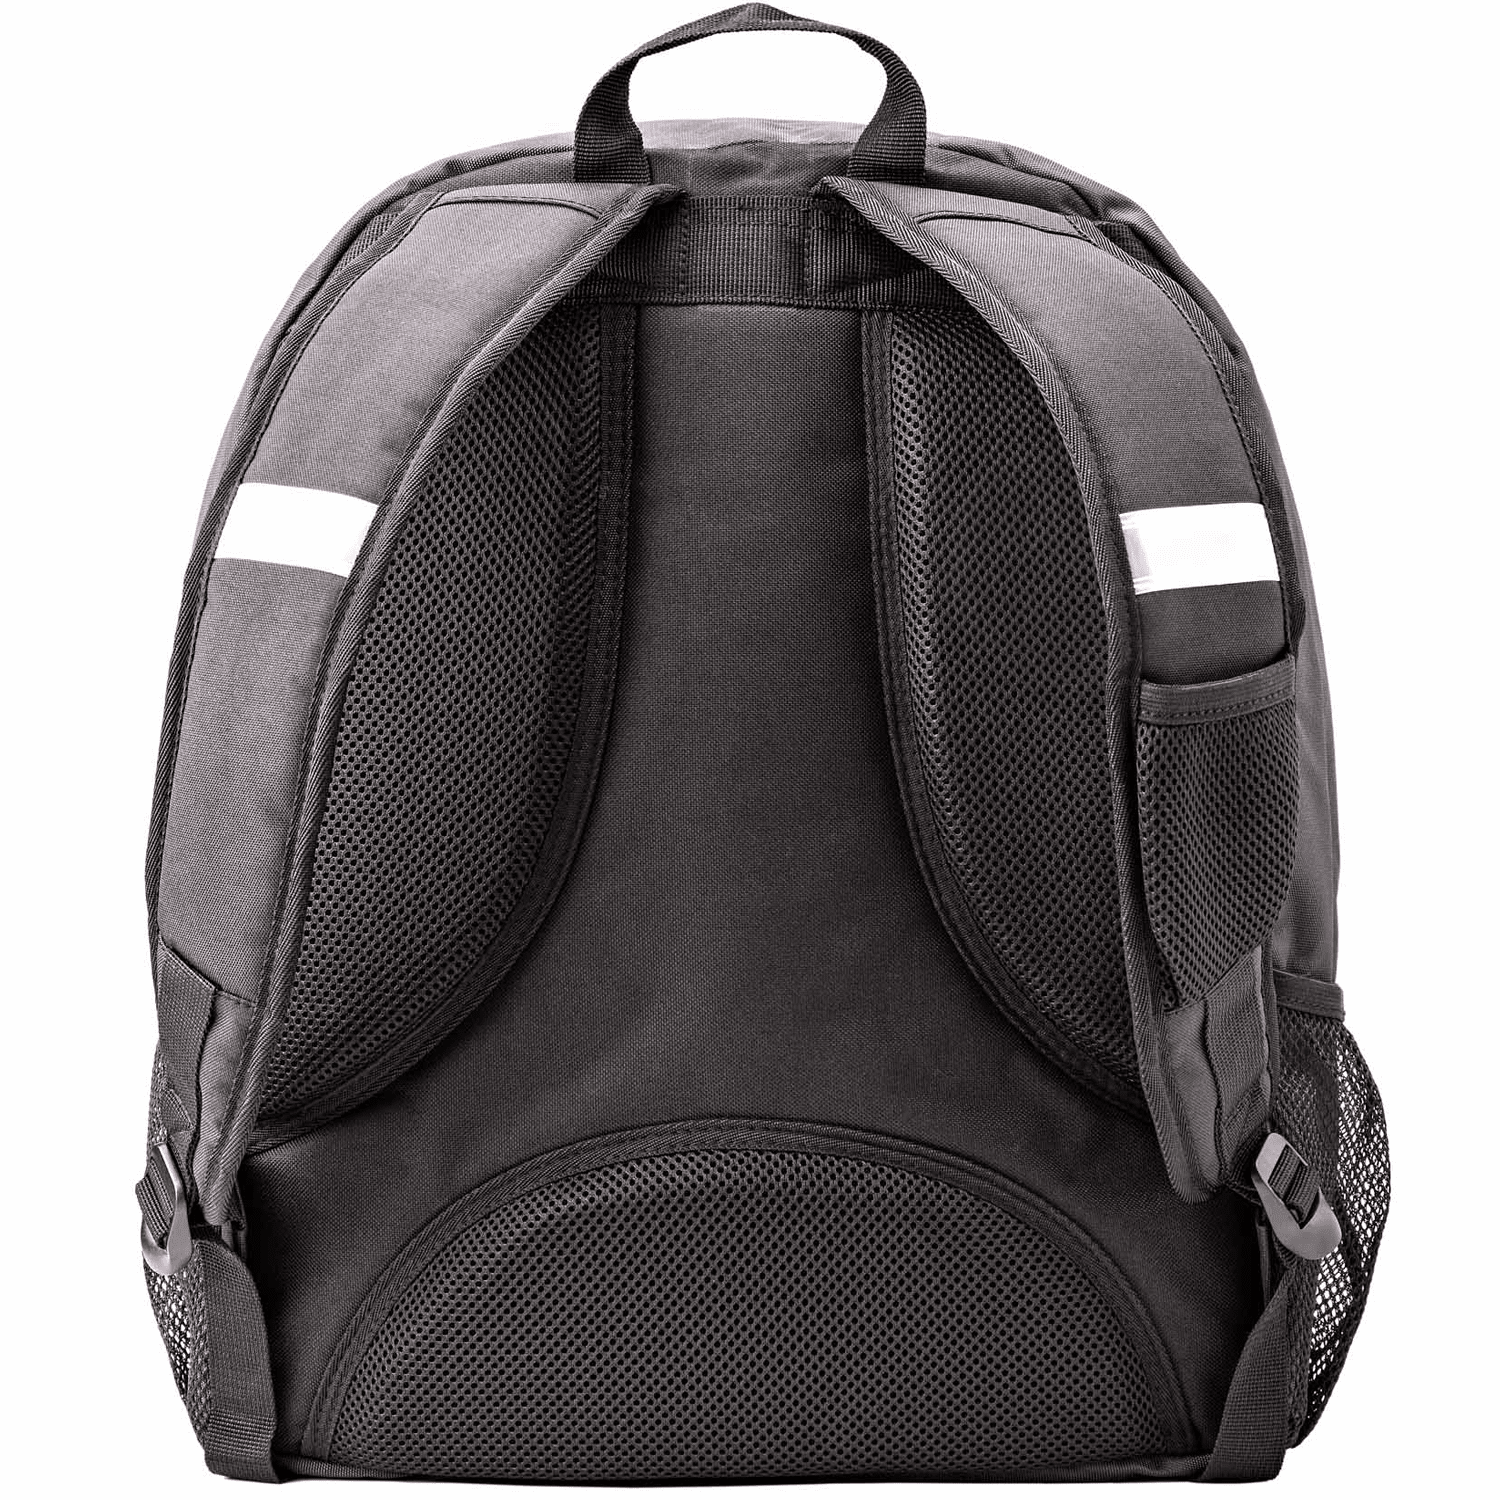 Sporthouse Student 2000 42L Backpack - Black 2 Shaws Department Stores